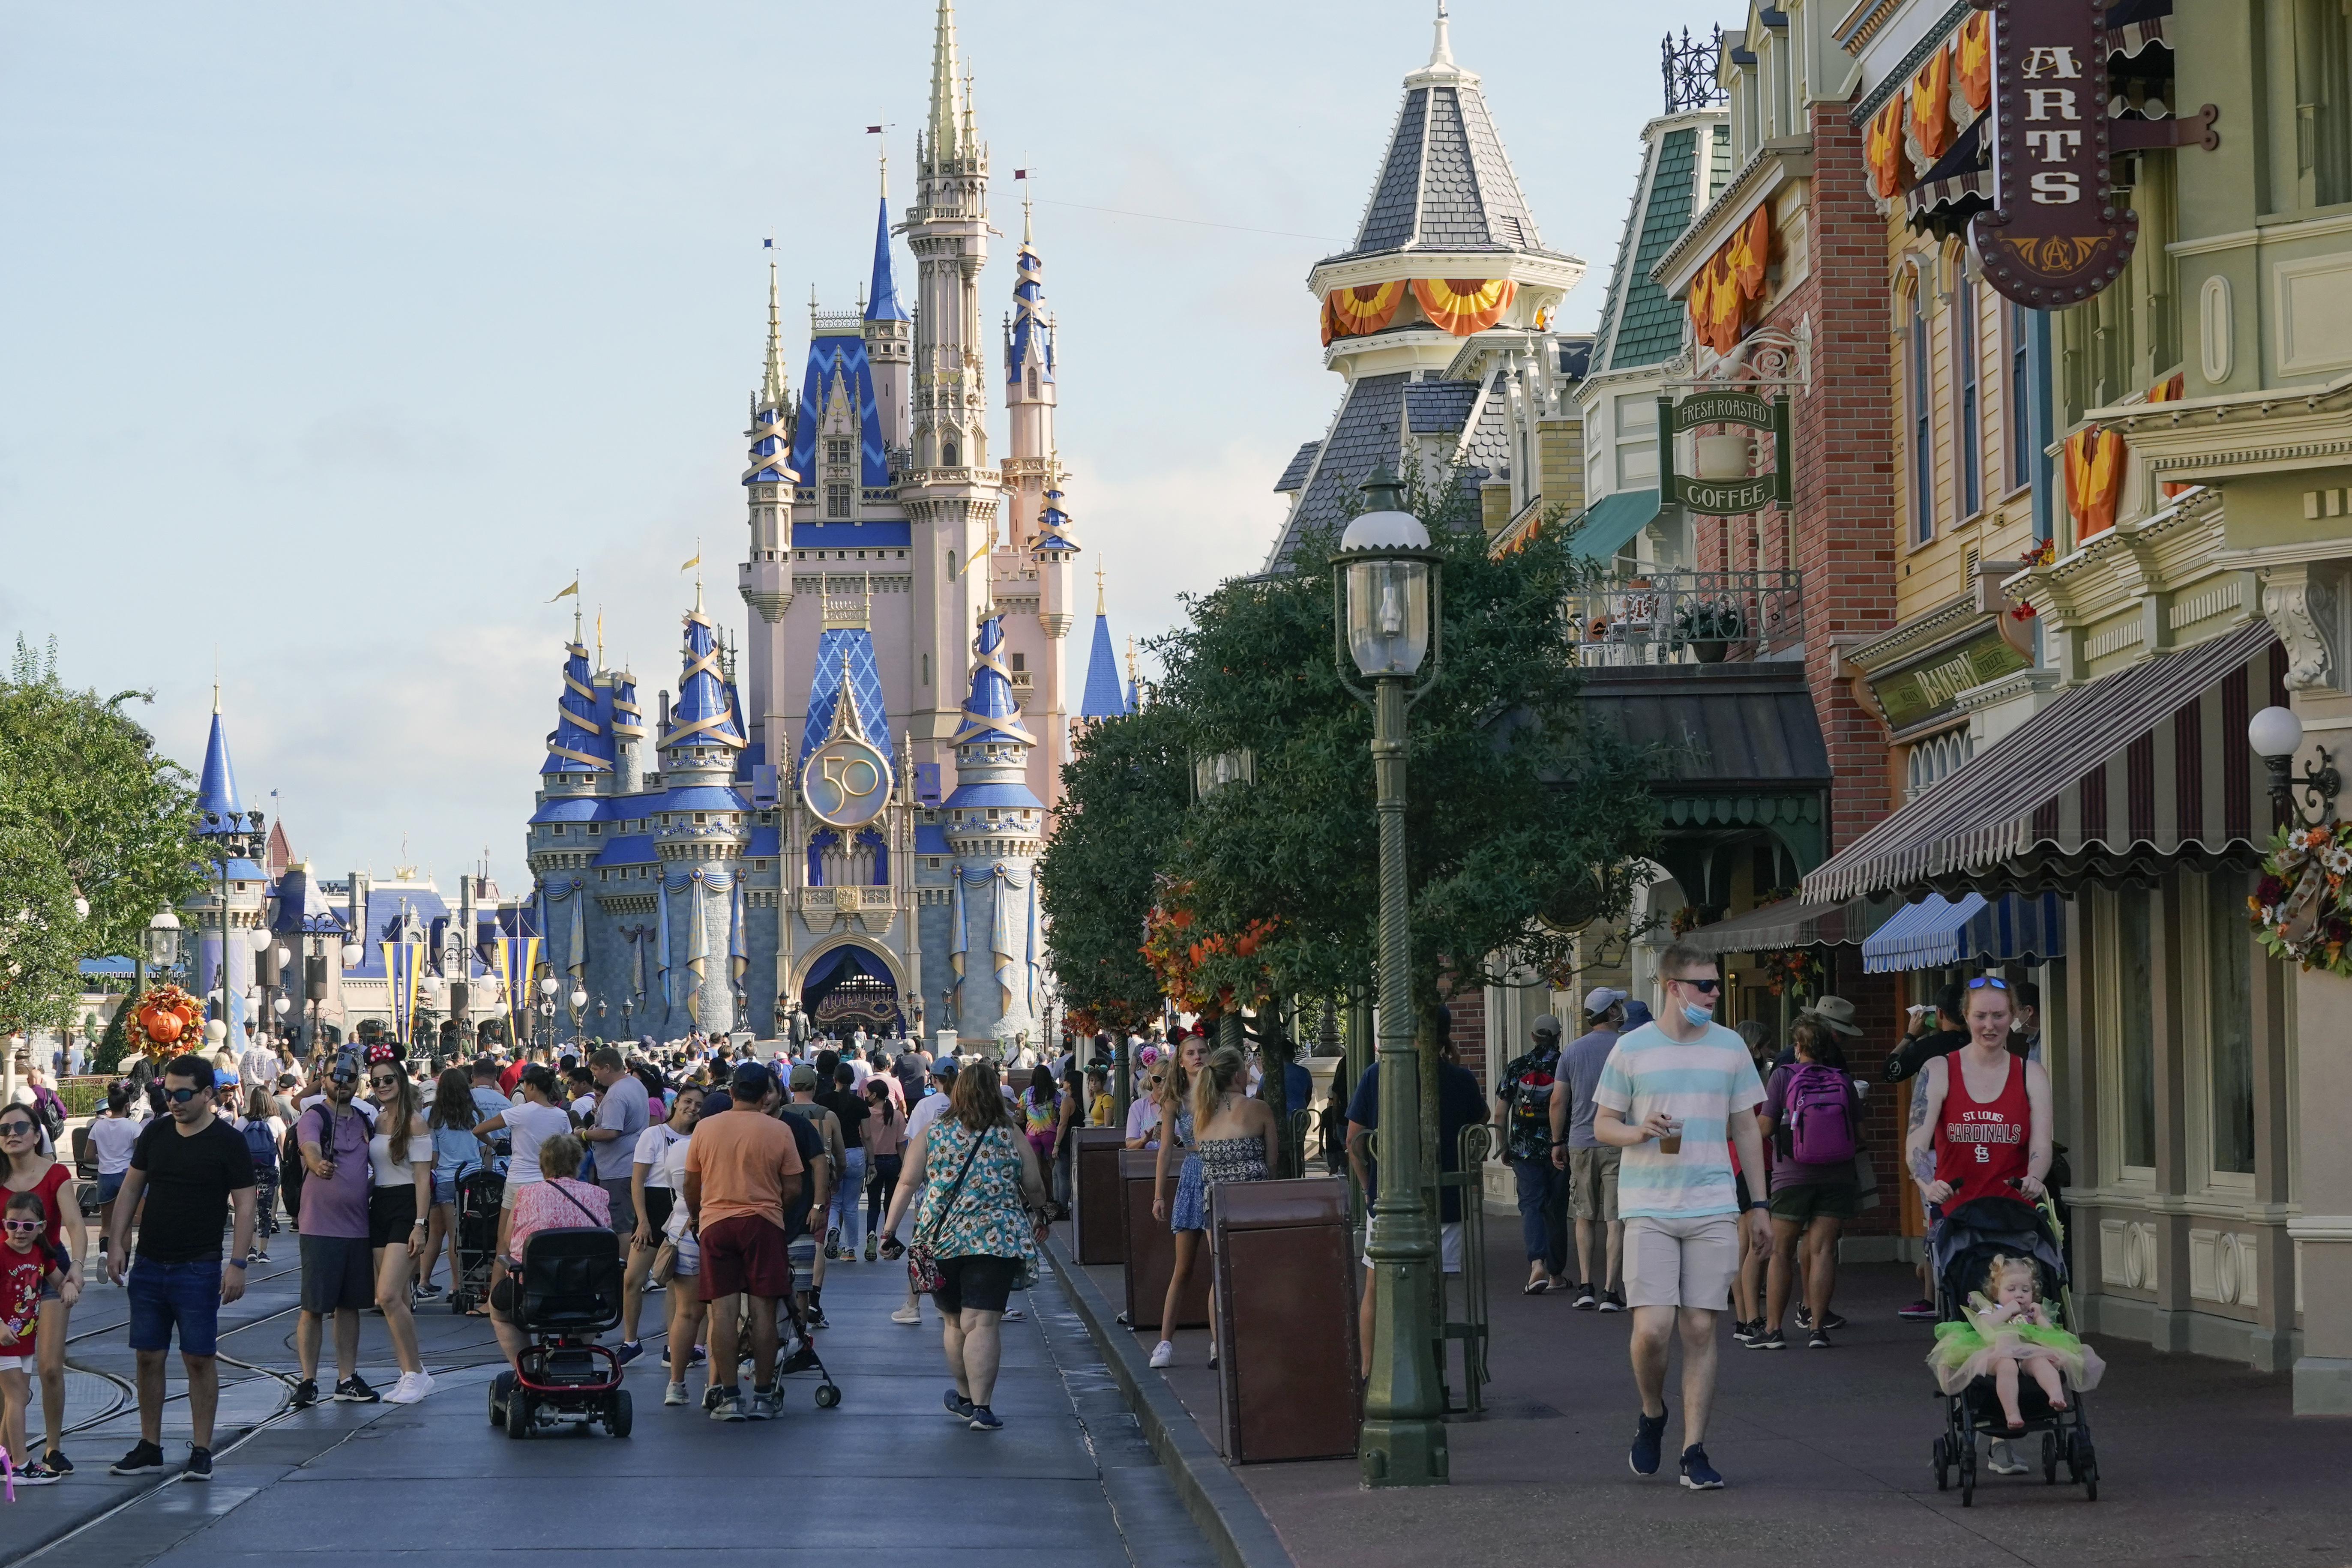 Disney World is full, according to its website